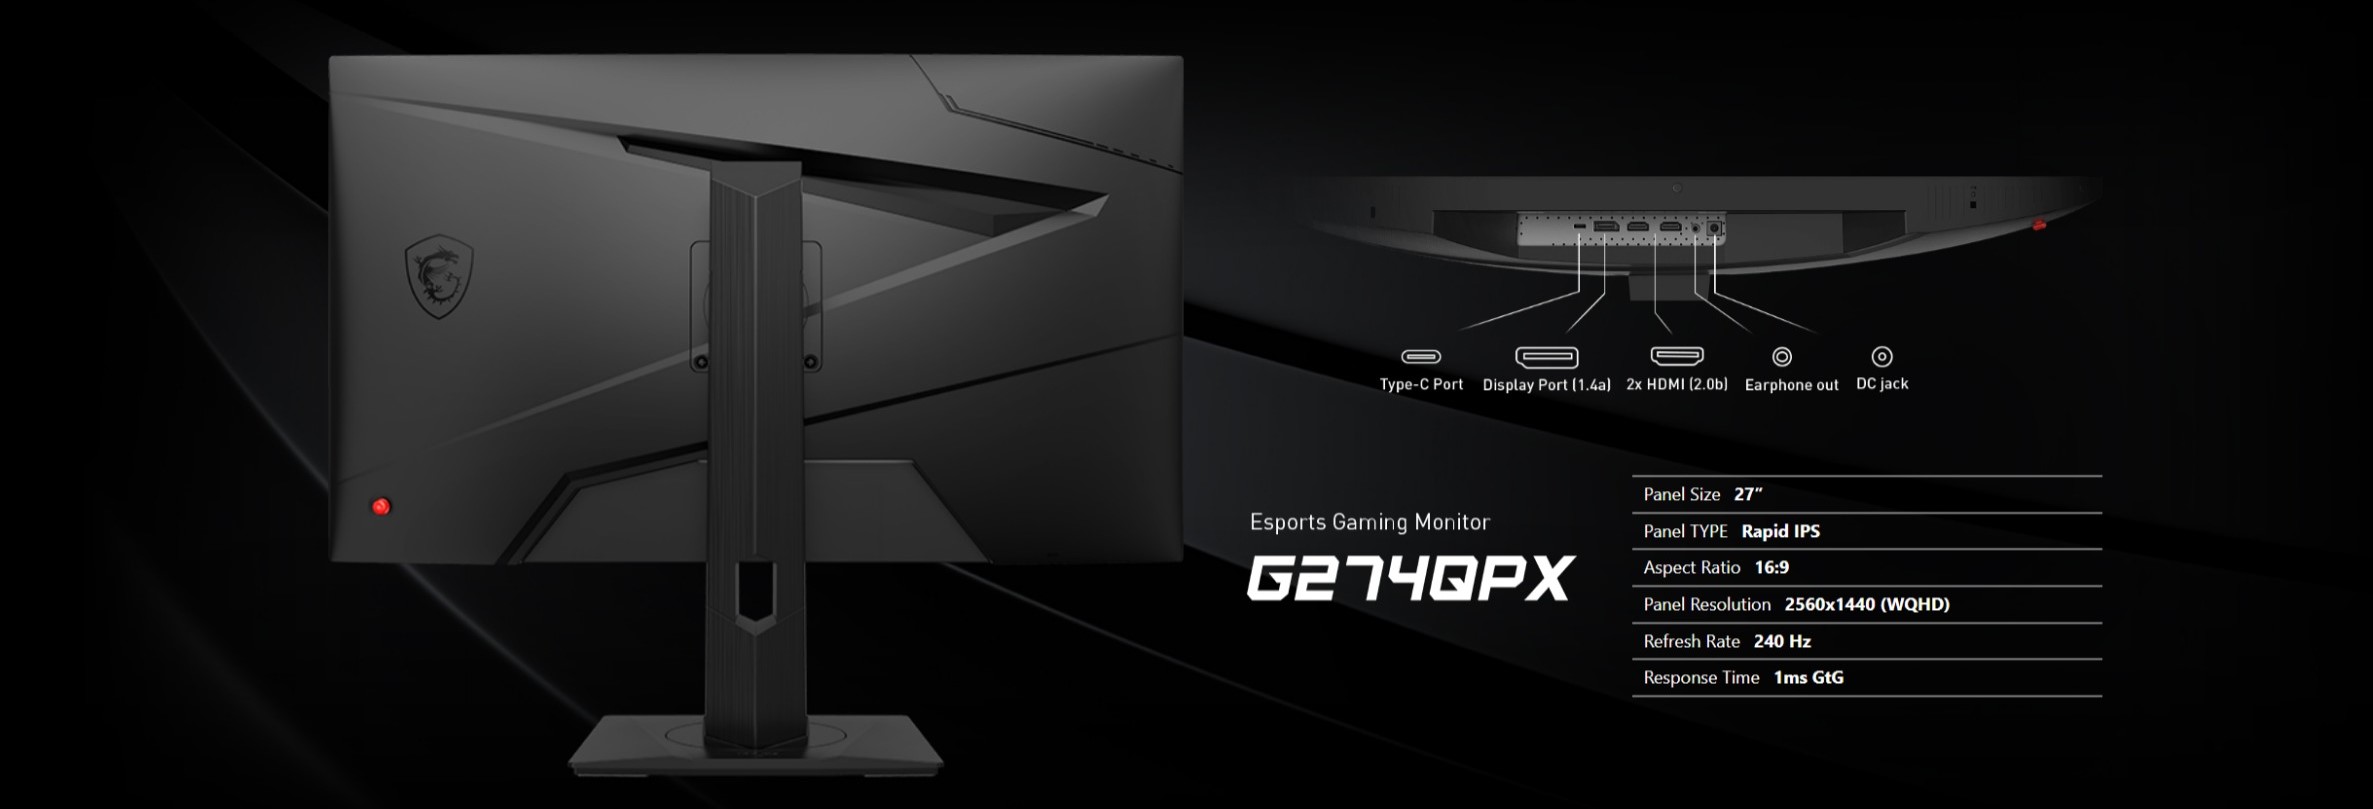 A large marketing image providing additional information about the product MSI G274QPX 27" QHD 240Hz IPS Monitor - Additional alt info not provided